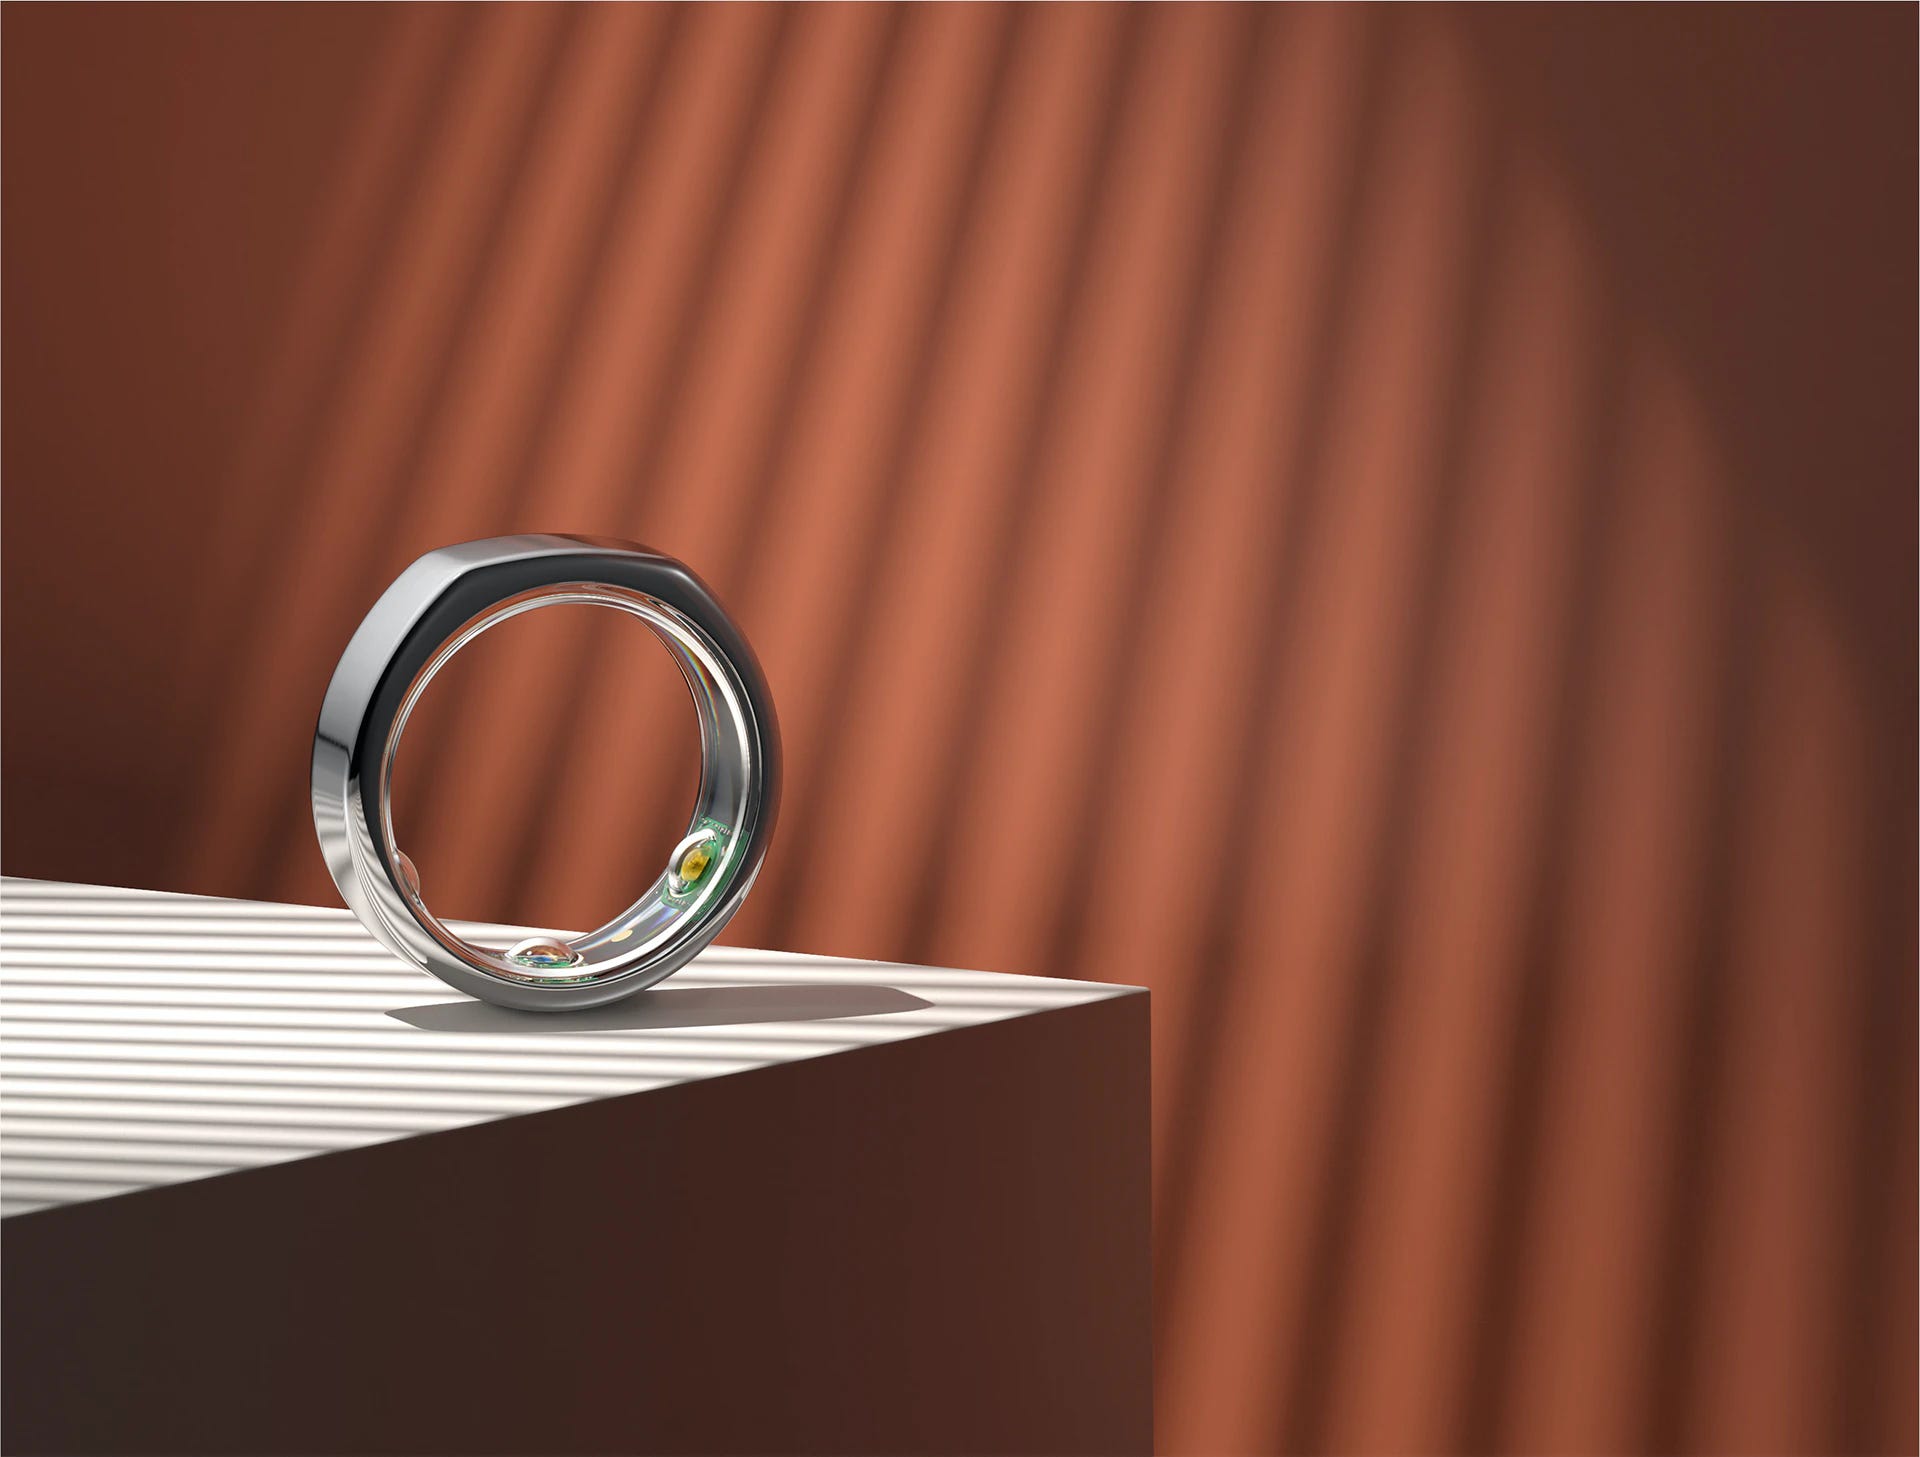 Oura Ring review: love the feature changes, hate the new subscription